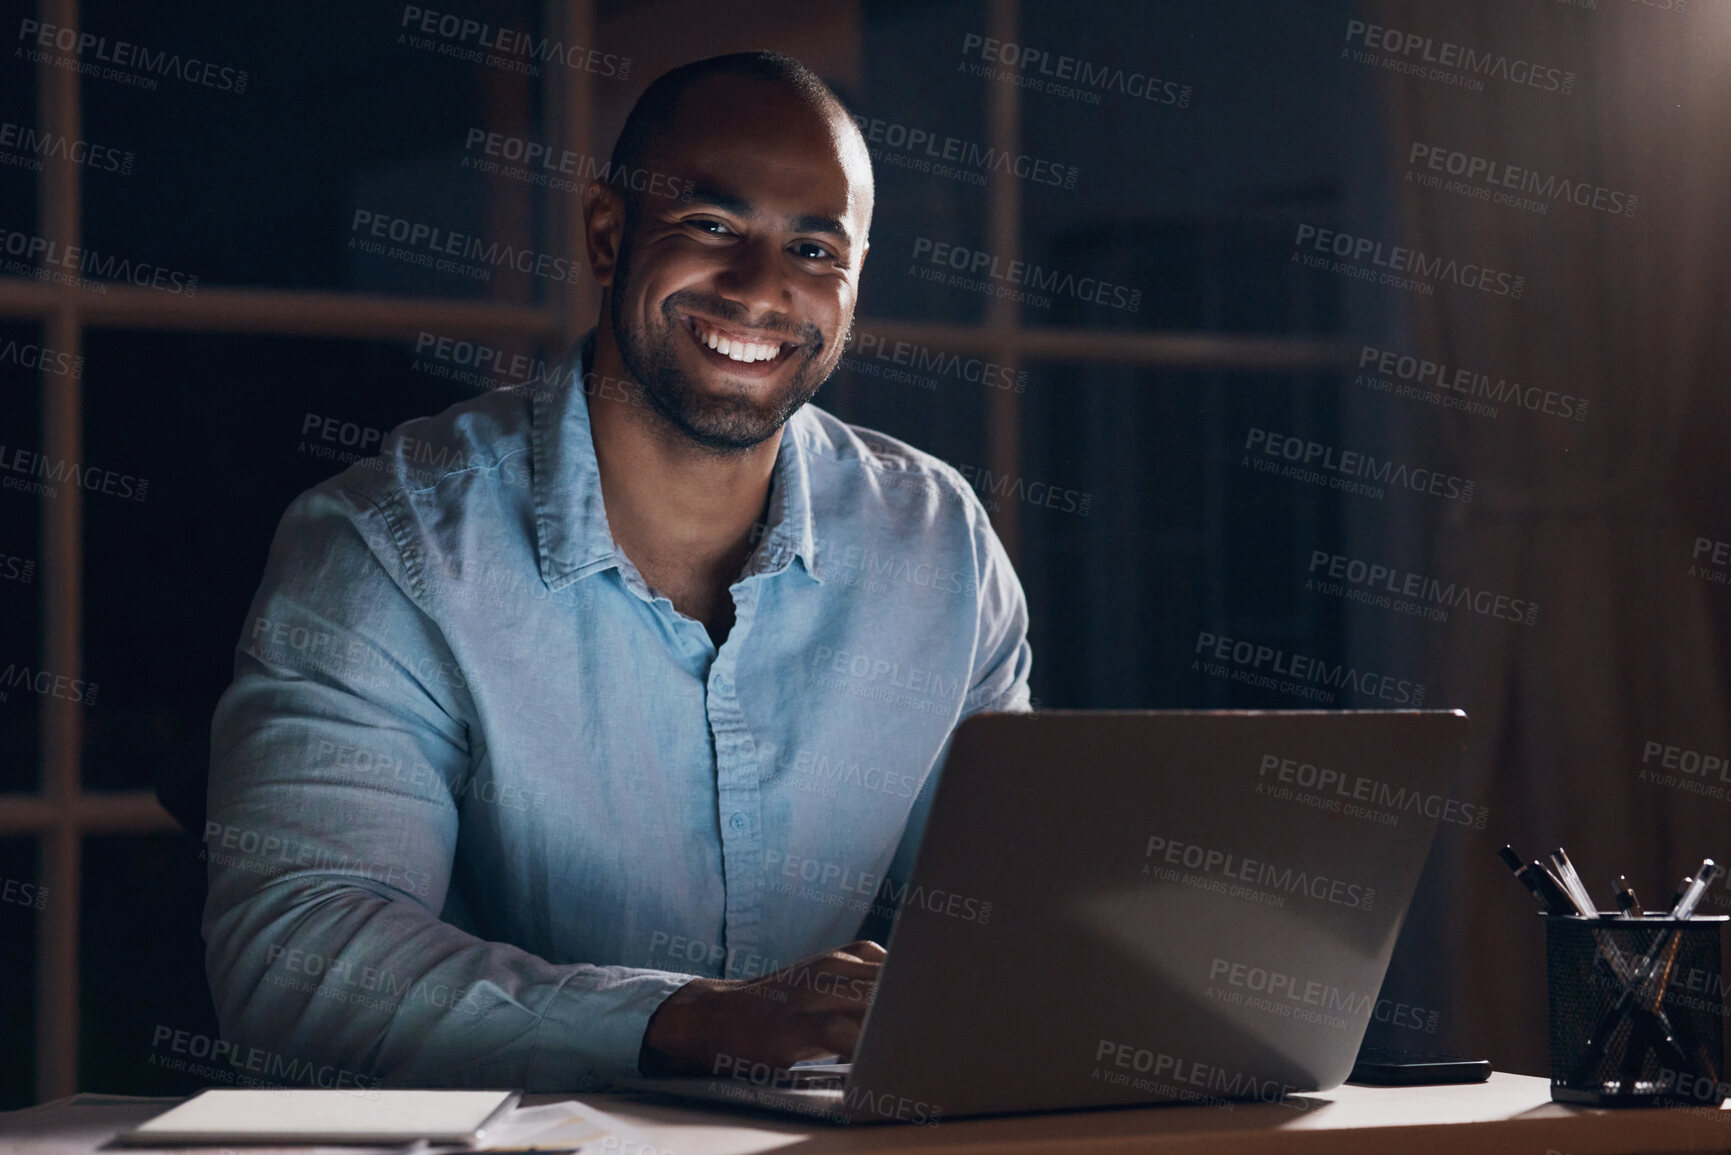 Buy stock photo Shot of a young businessman working on his laptop at night